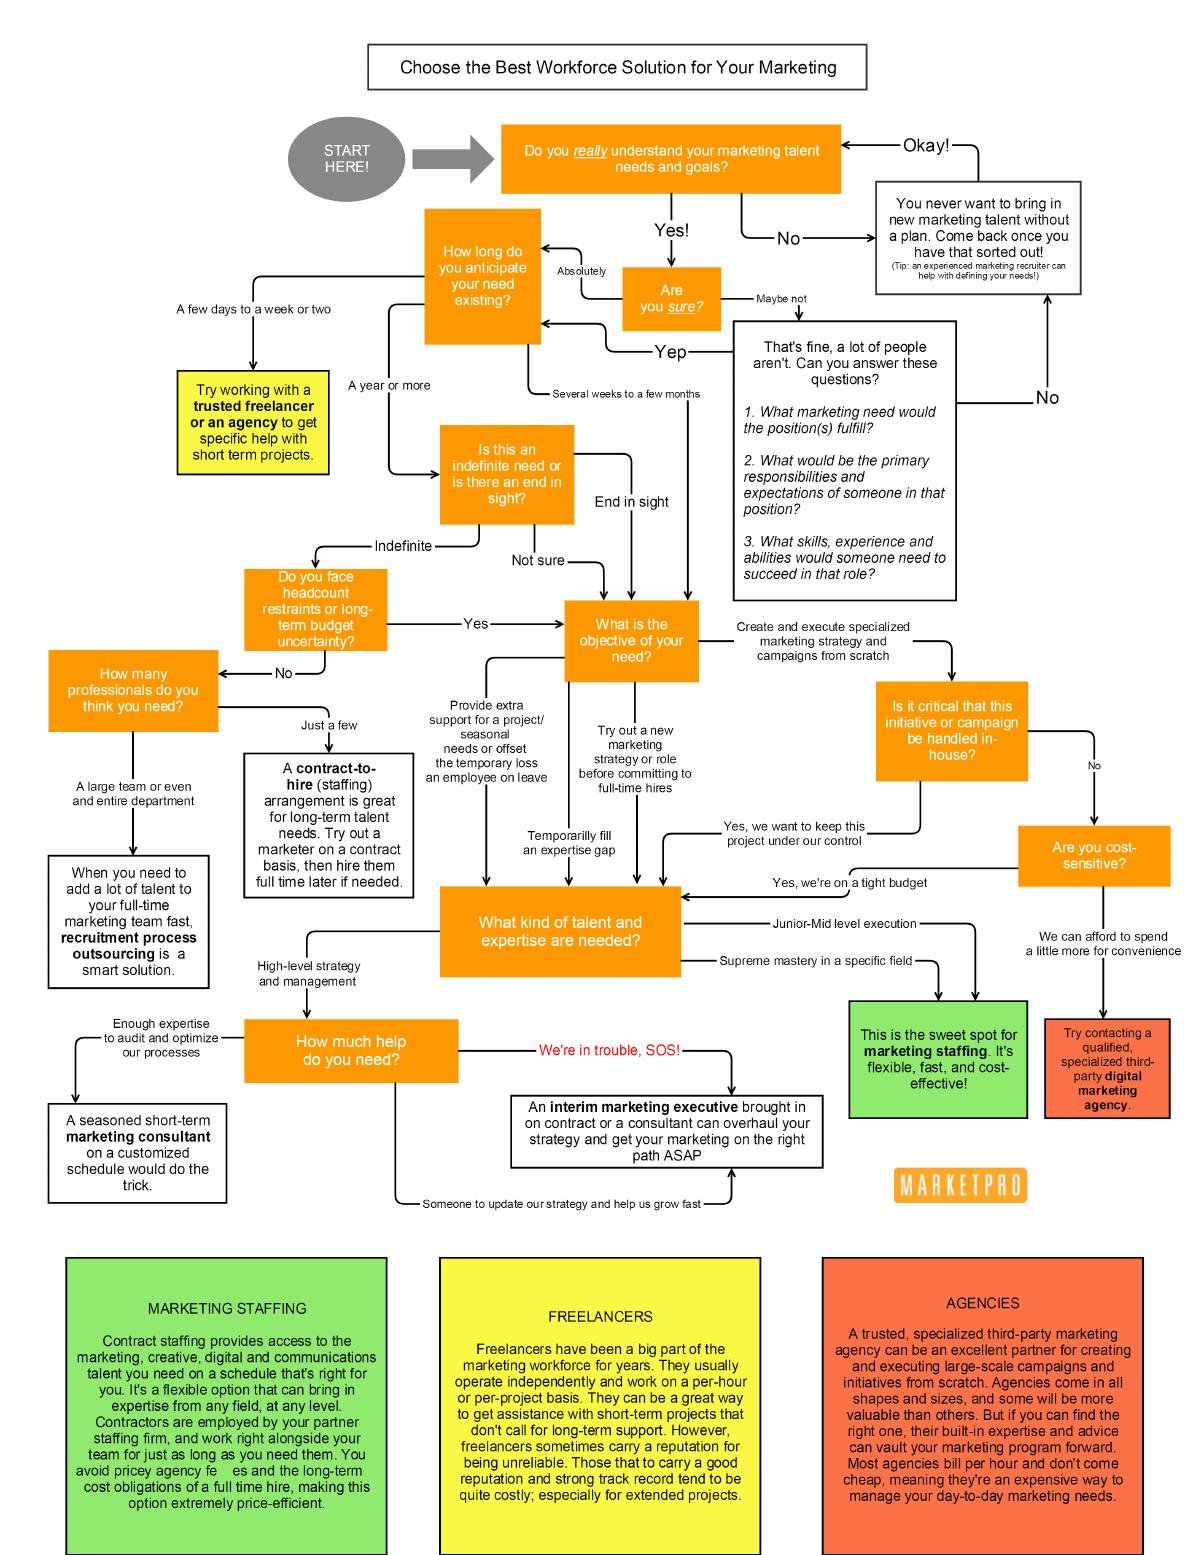 Flowchart to Choose the Best Flexible Workforce Solution for Your Marketing